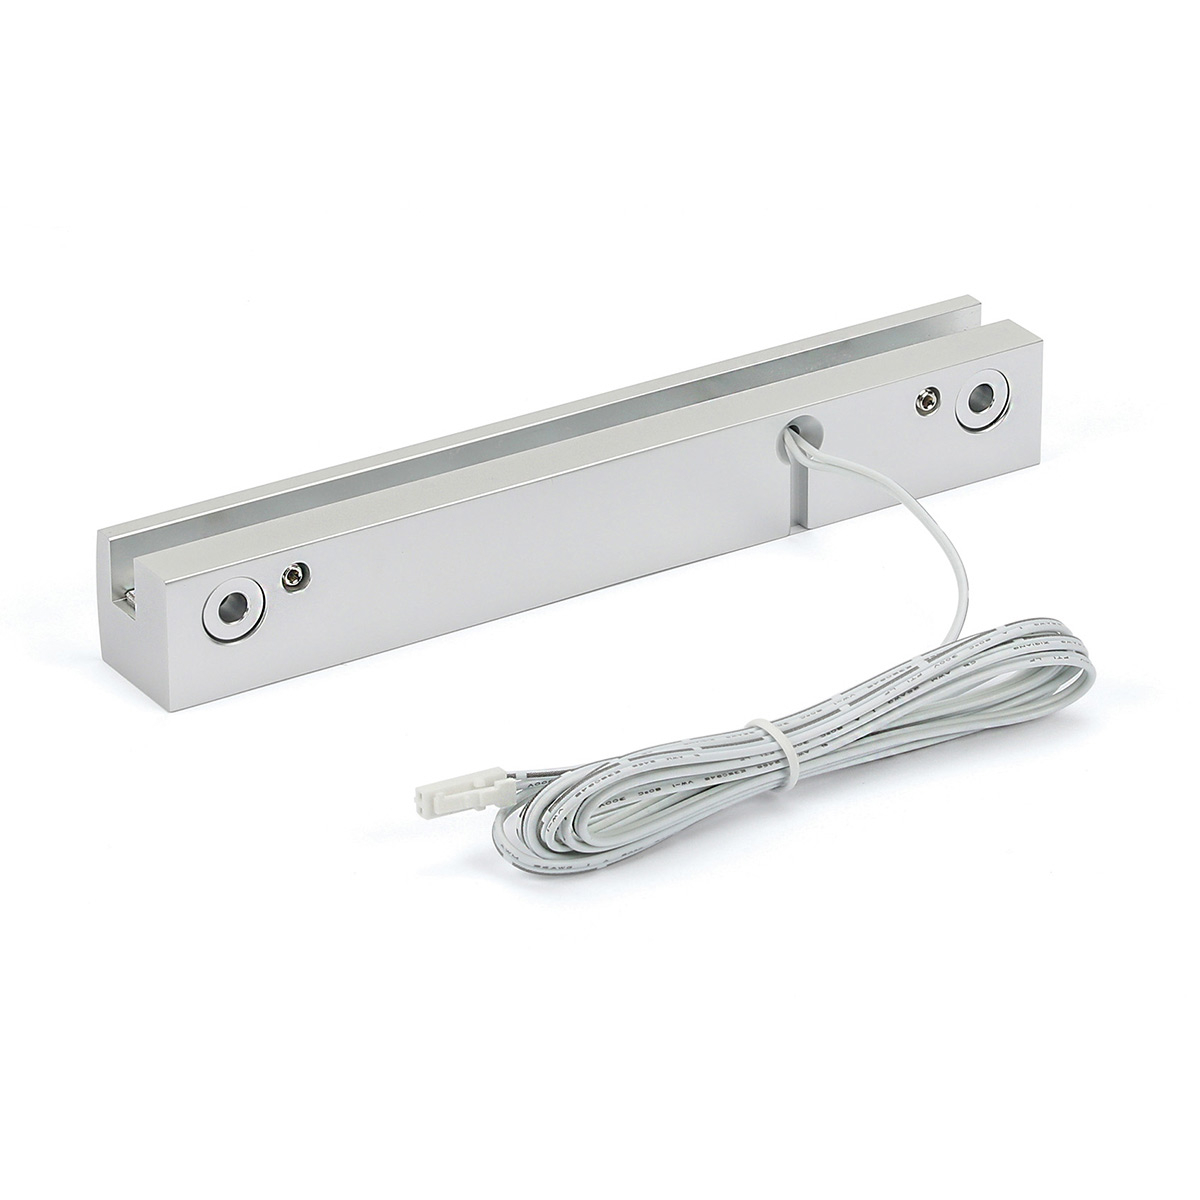 BLUE LED Sign Clamp in 3 1/8'' (80 mm) length X 1'' (25.4 mm) Silver satin aluminum finish.Mount Kit Supports Signs Up To 5/16'' Thick, Wall Mount, Low Voltage transformer included.